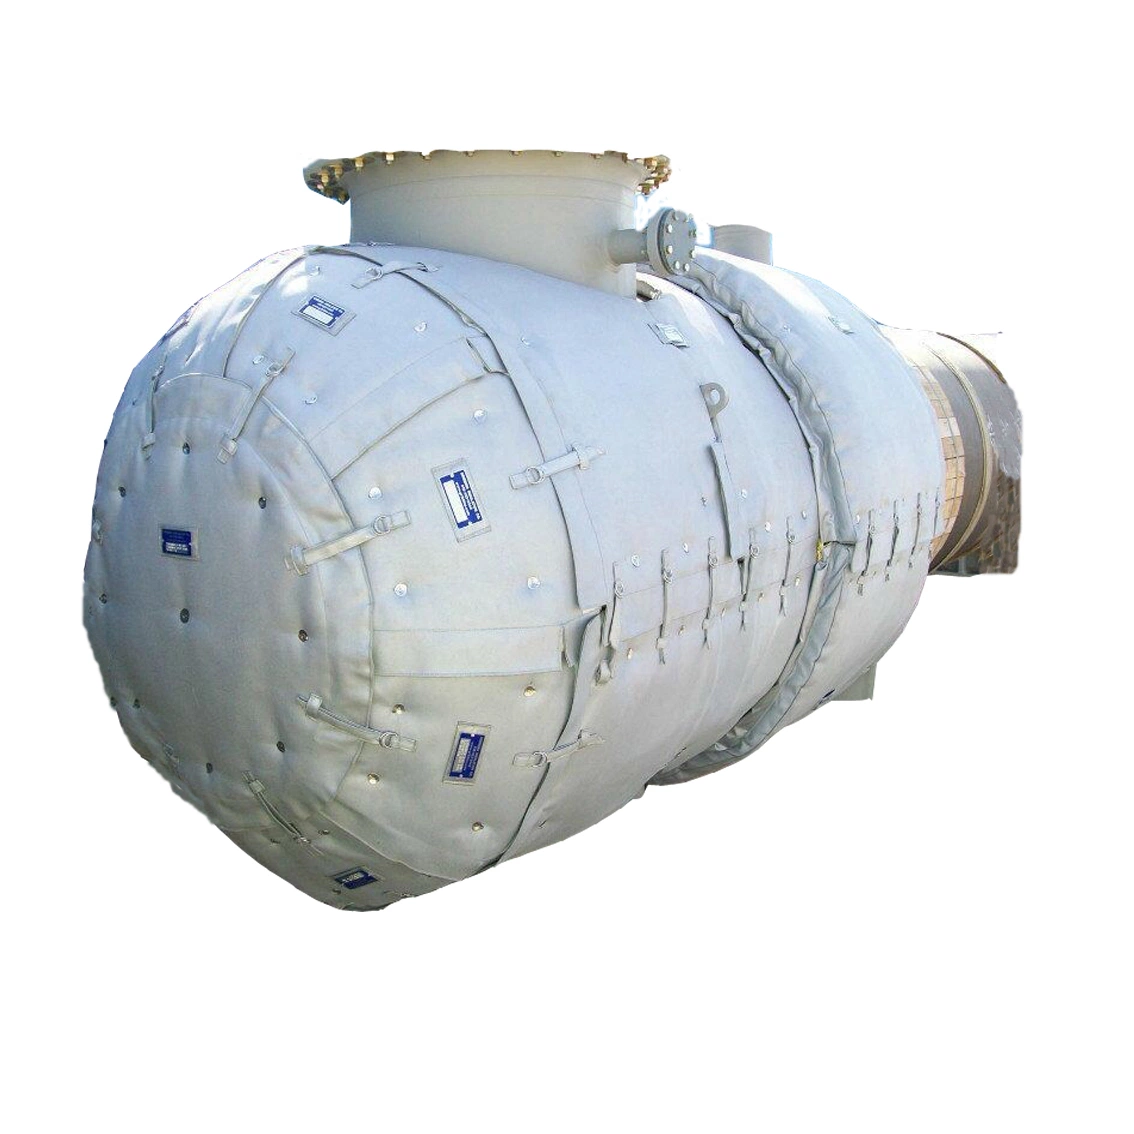 Thermal Insulation Cover for Water Tank with Fiberglass Materials